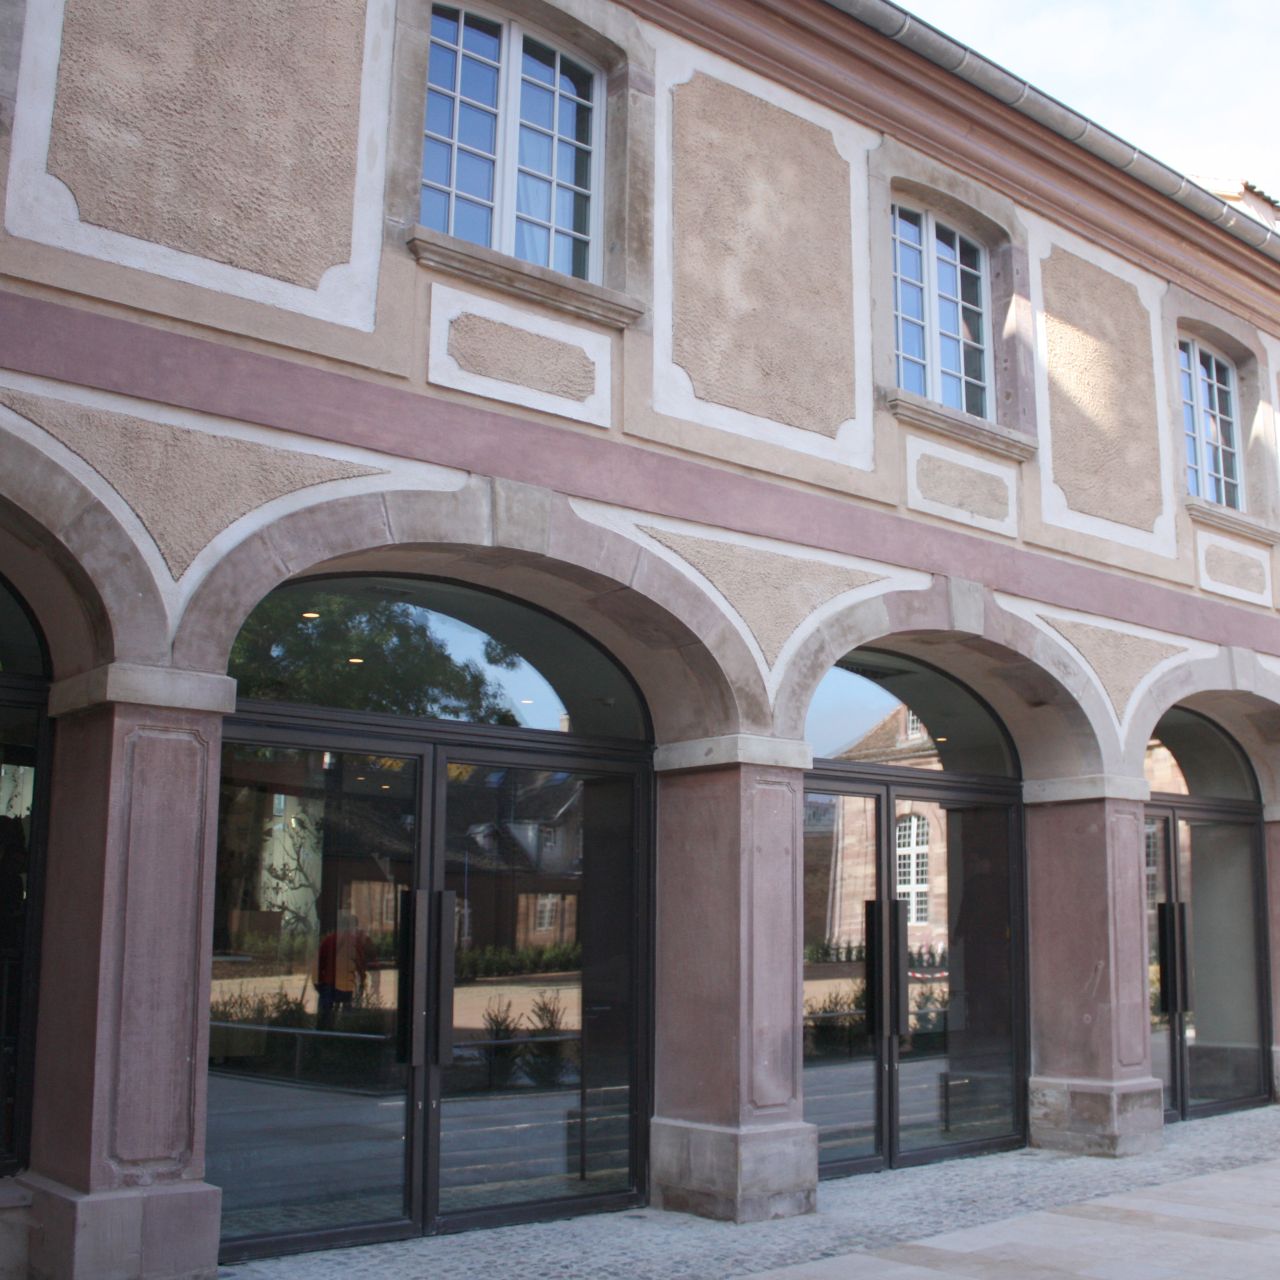 Hotel Les Haras - Strasbourg - Great prices at HOTEL INFO